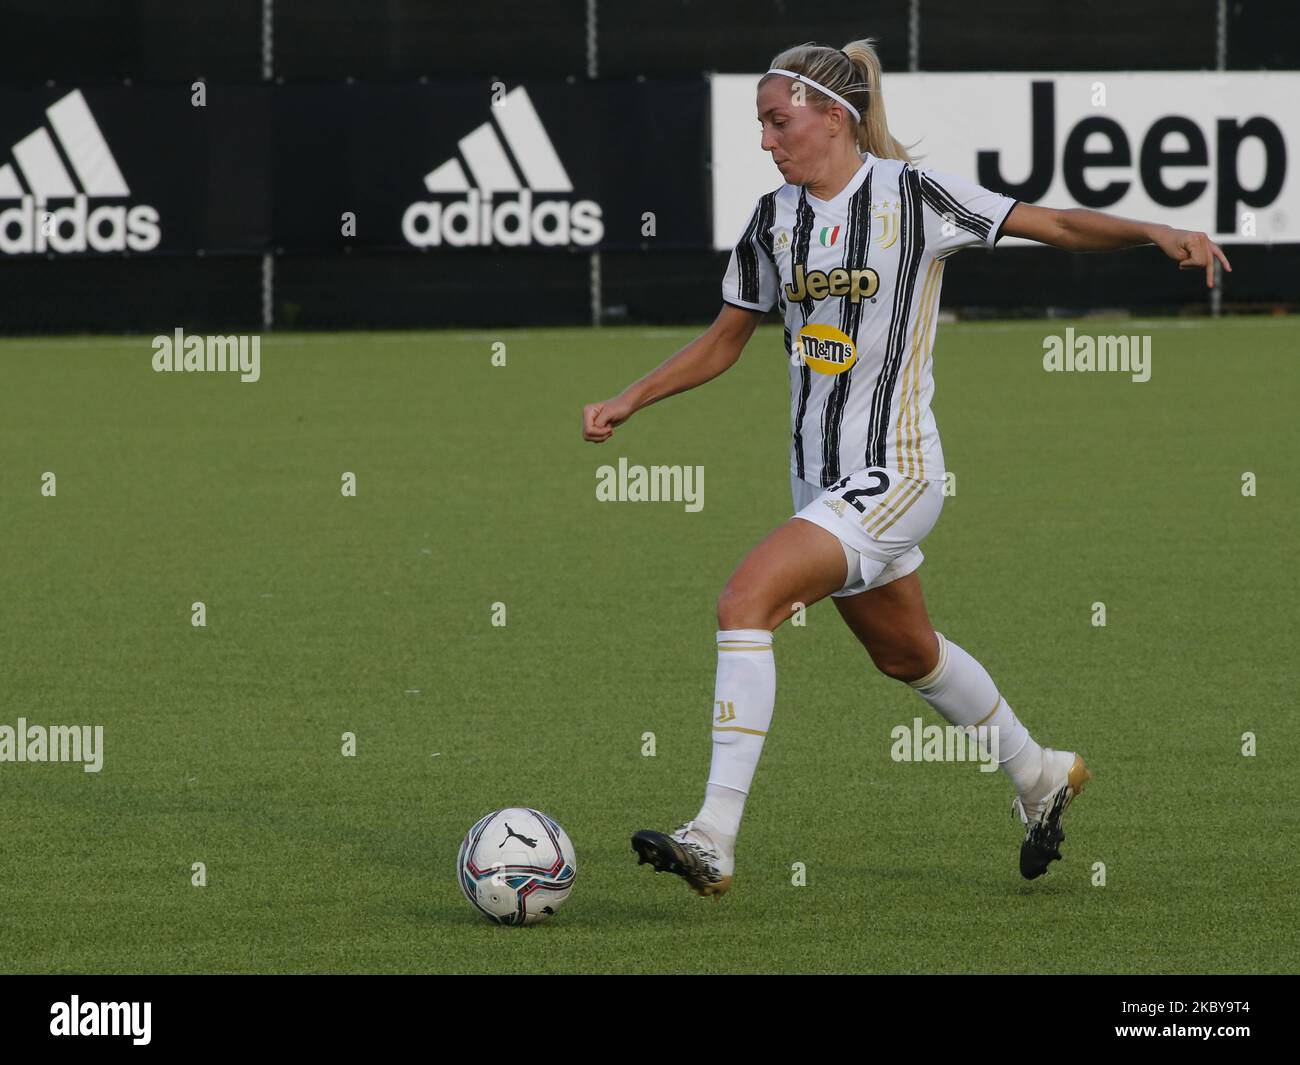 Linda Sembrant during Serie A match between Juventus Woman v San Marino Academy, in Vinovo, Italy on September 6, 2020 (Photo by Loris Roselli). Stock Photo